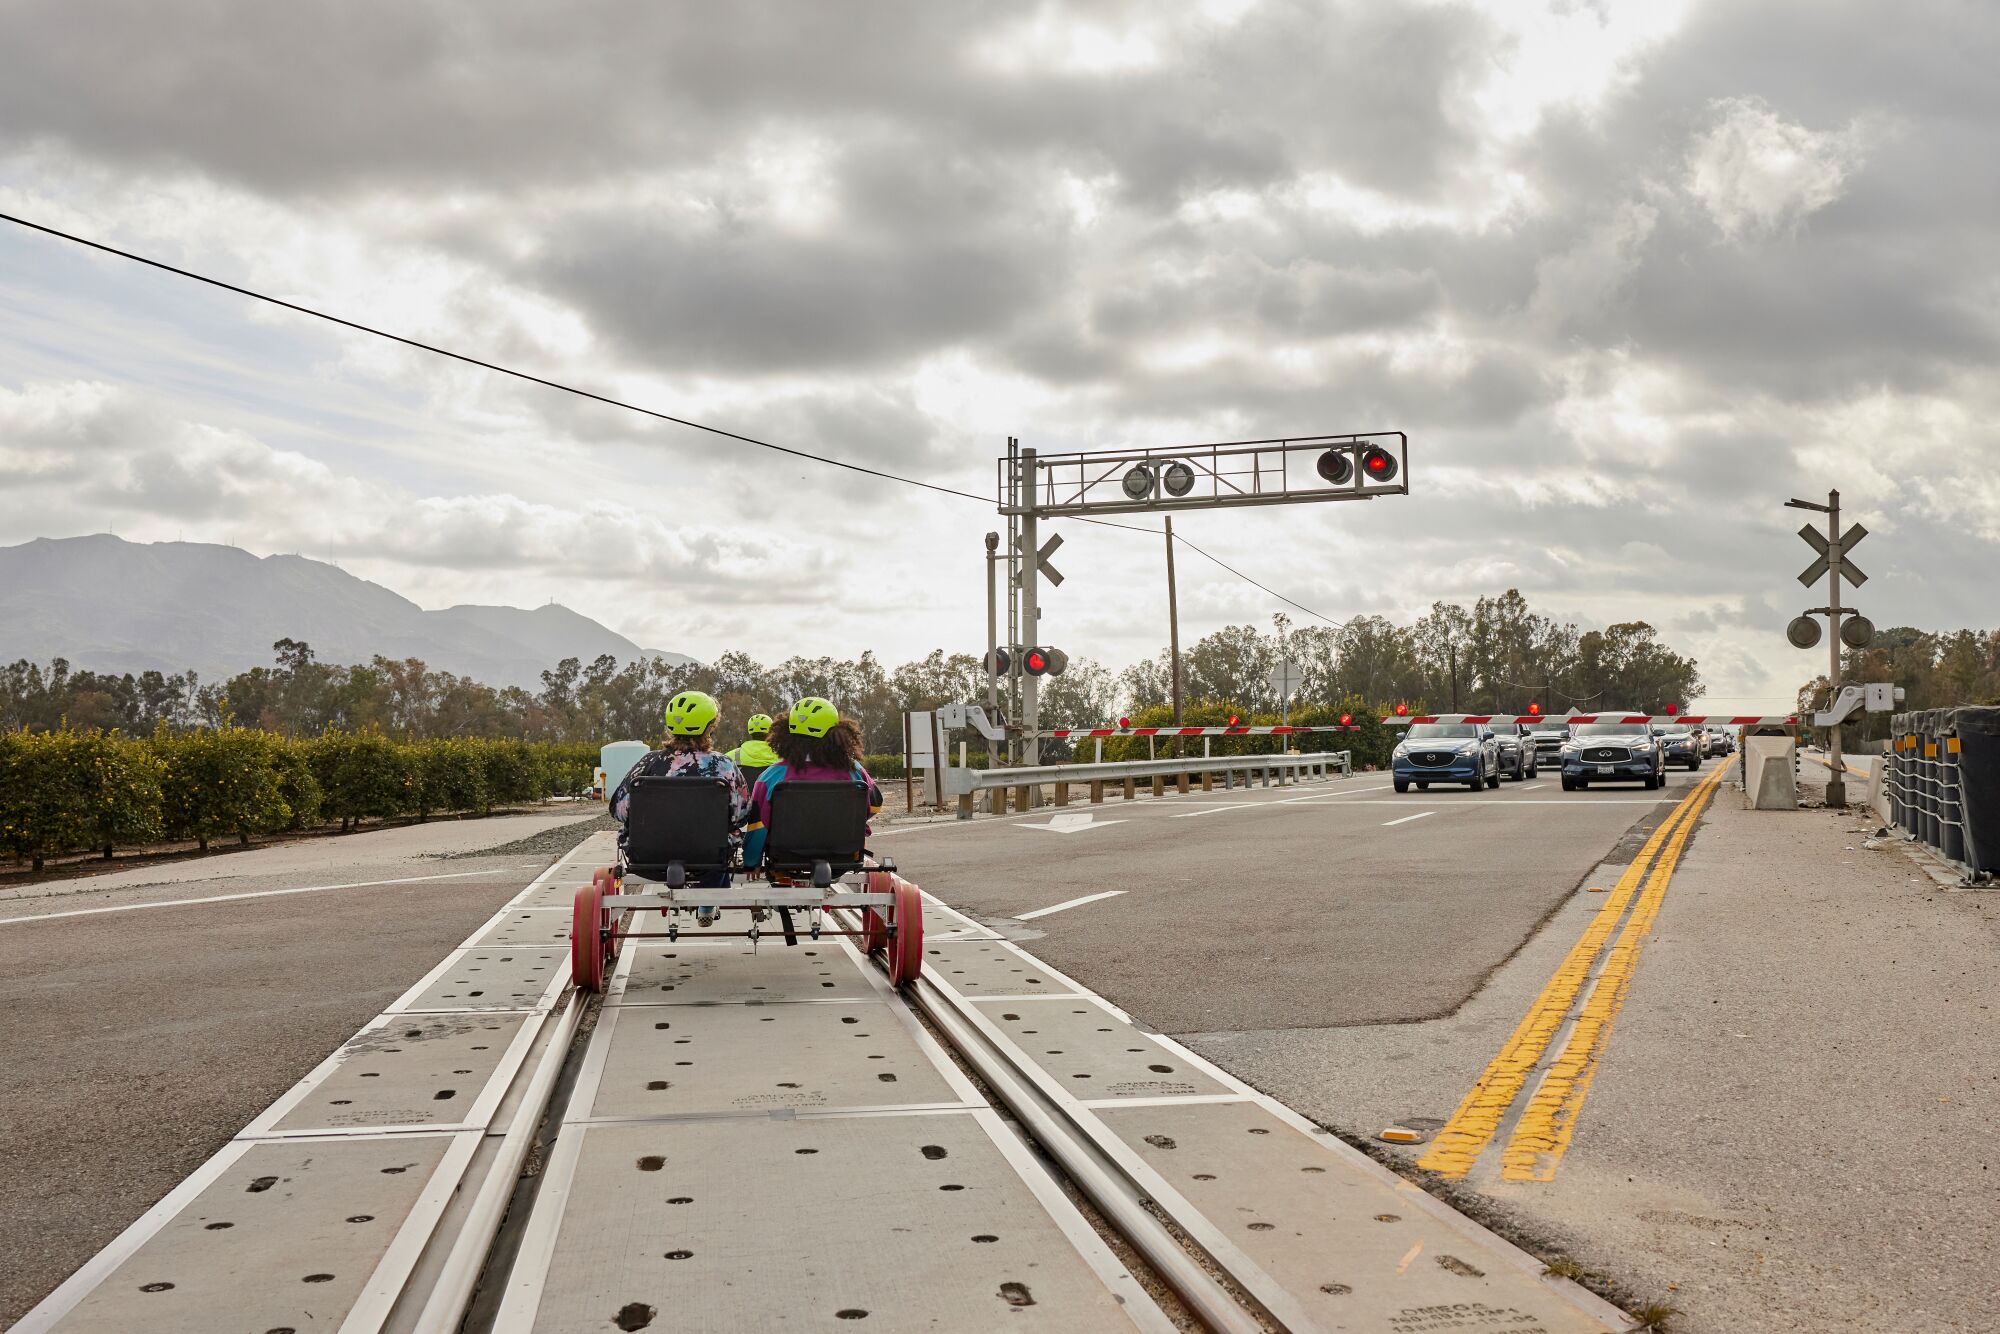 A view from behind of two people in a railbike, crossing a road with cars waiting for them to pass.